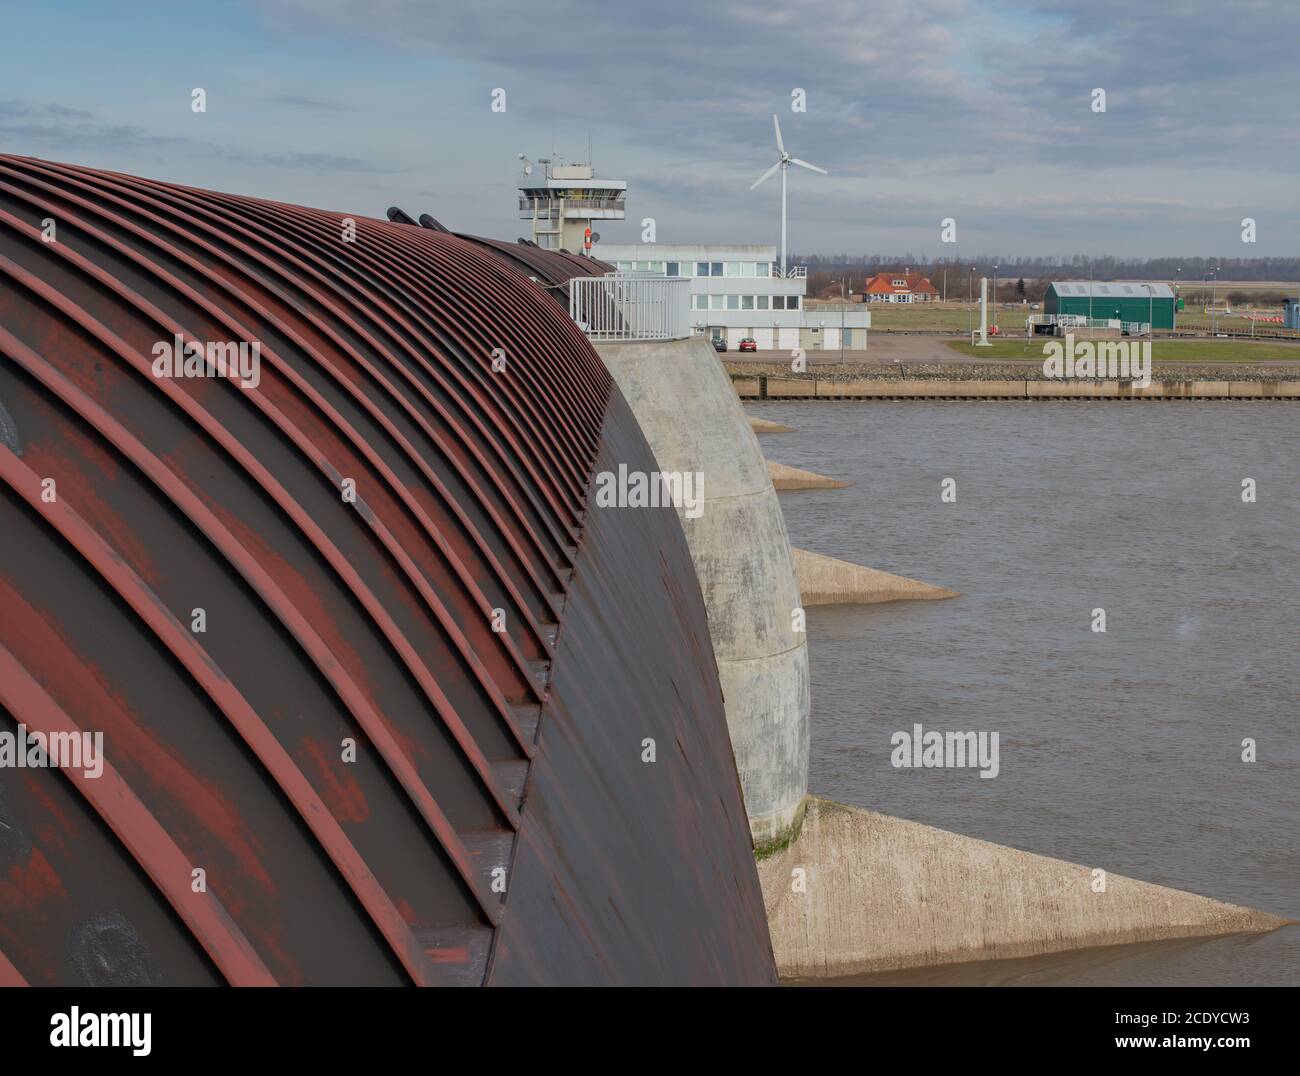 Eider Barrage to protect against storm surges in the North Sea Stock Photo